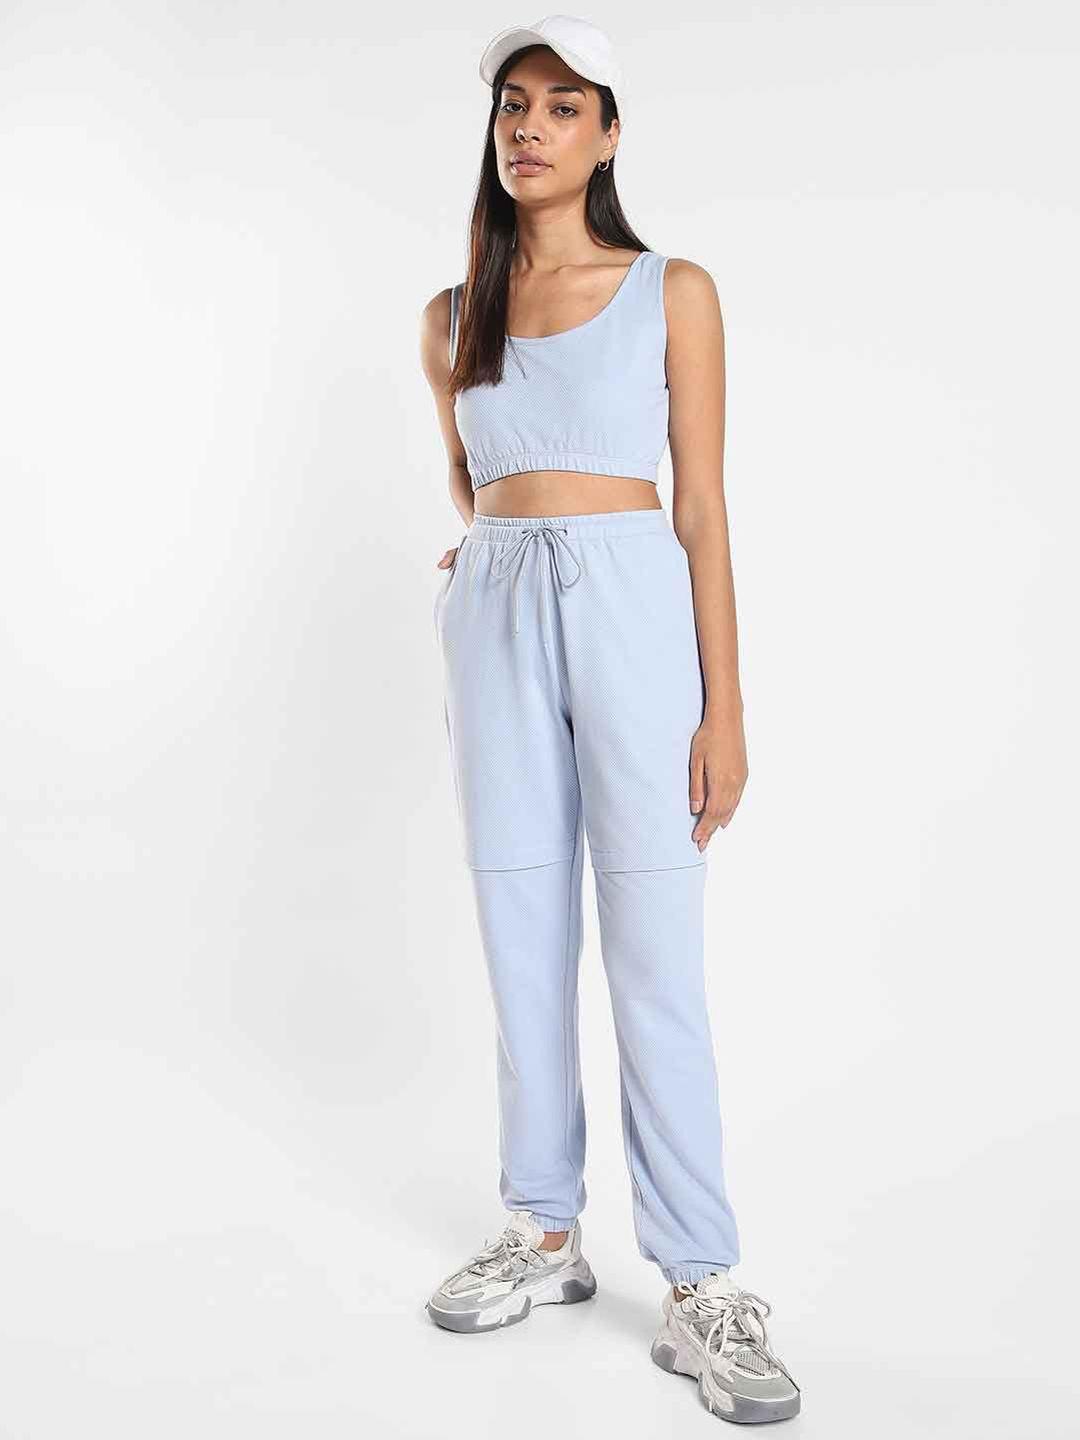 nobero textured crop top with joggers co-ords